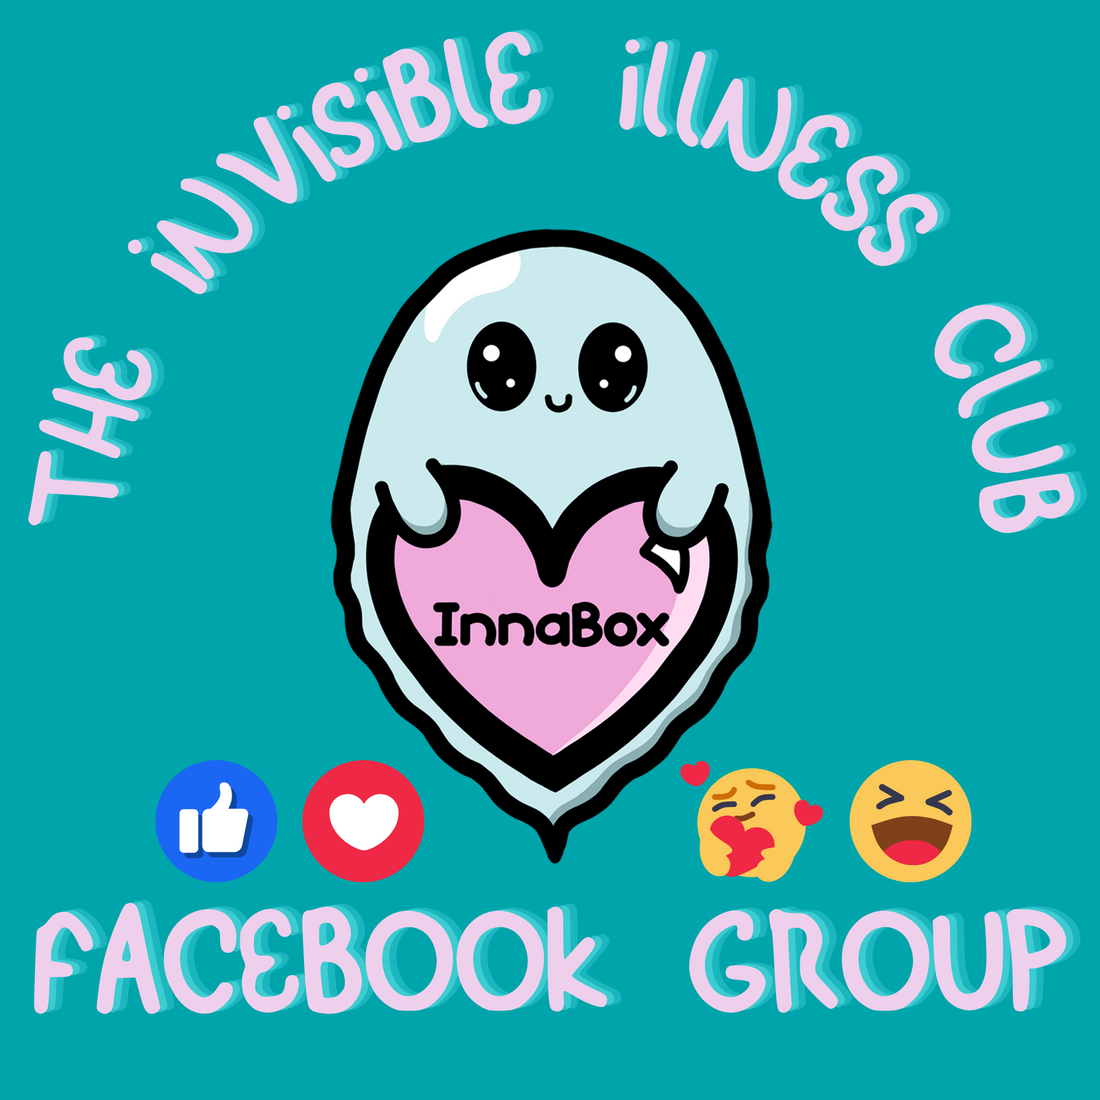 Have you joined our Facebook Group?